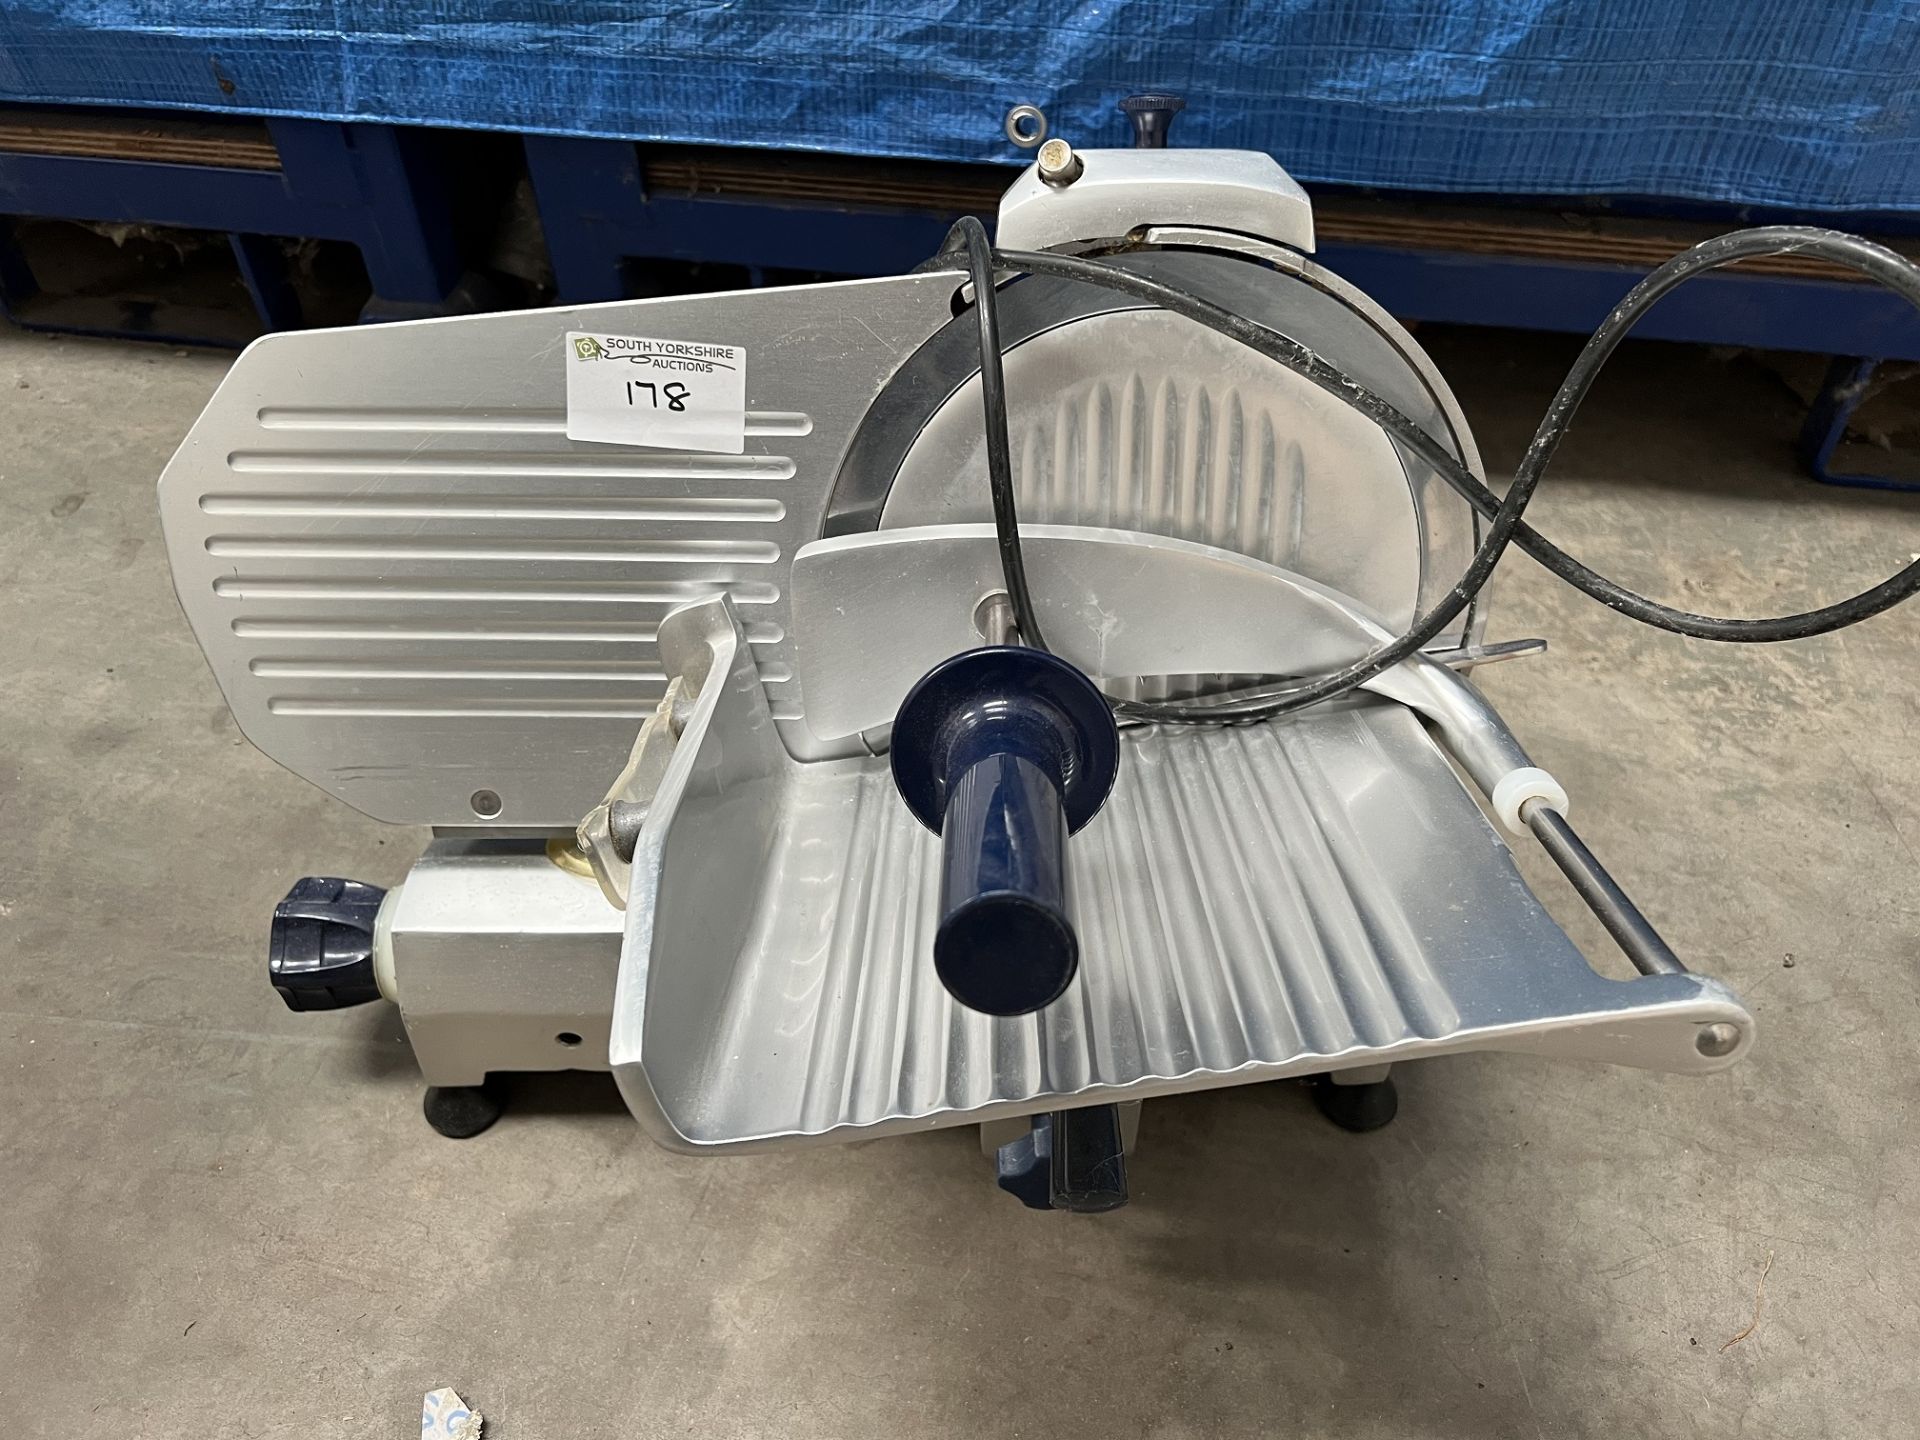 ITAL 10" Cooked Meat Slicer